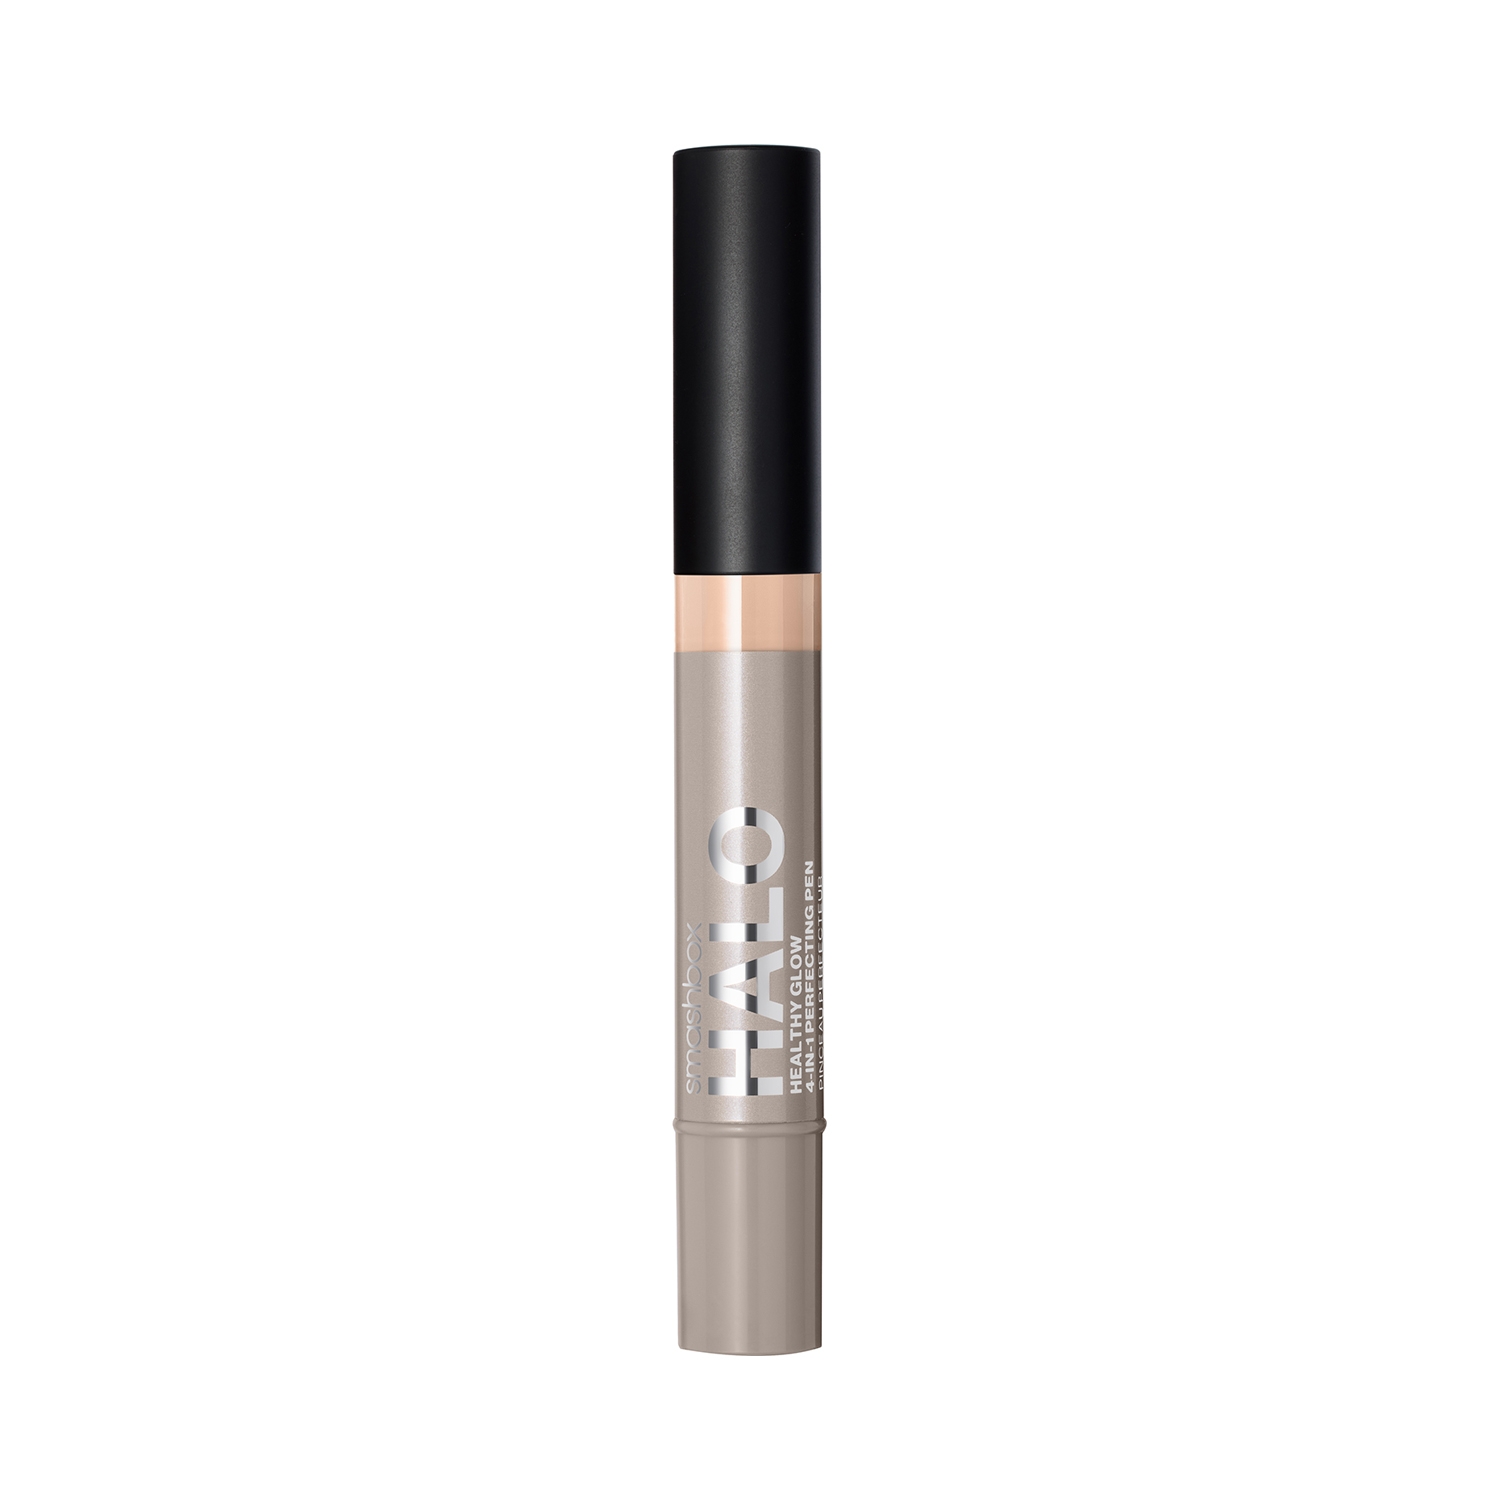 Smashbox | Smashbox Halo Healthy Glow 4-In-1 Perfecting Concealer Pen - F20C (3.5ml)